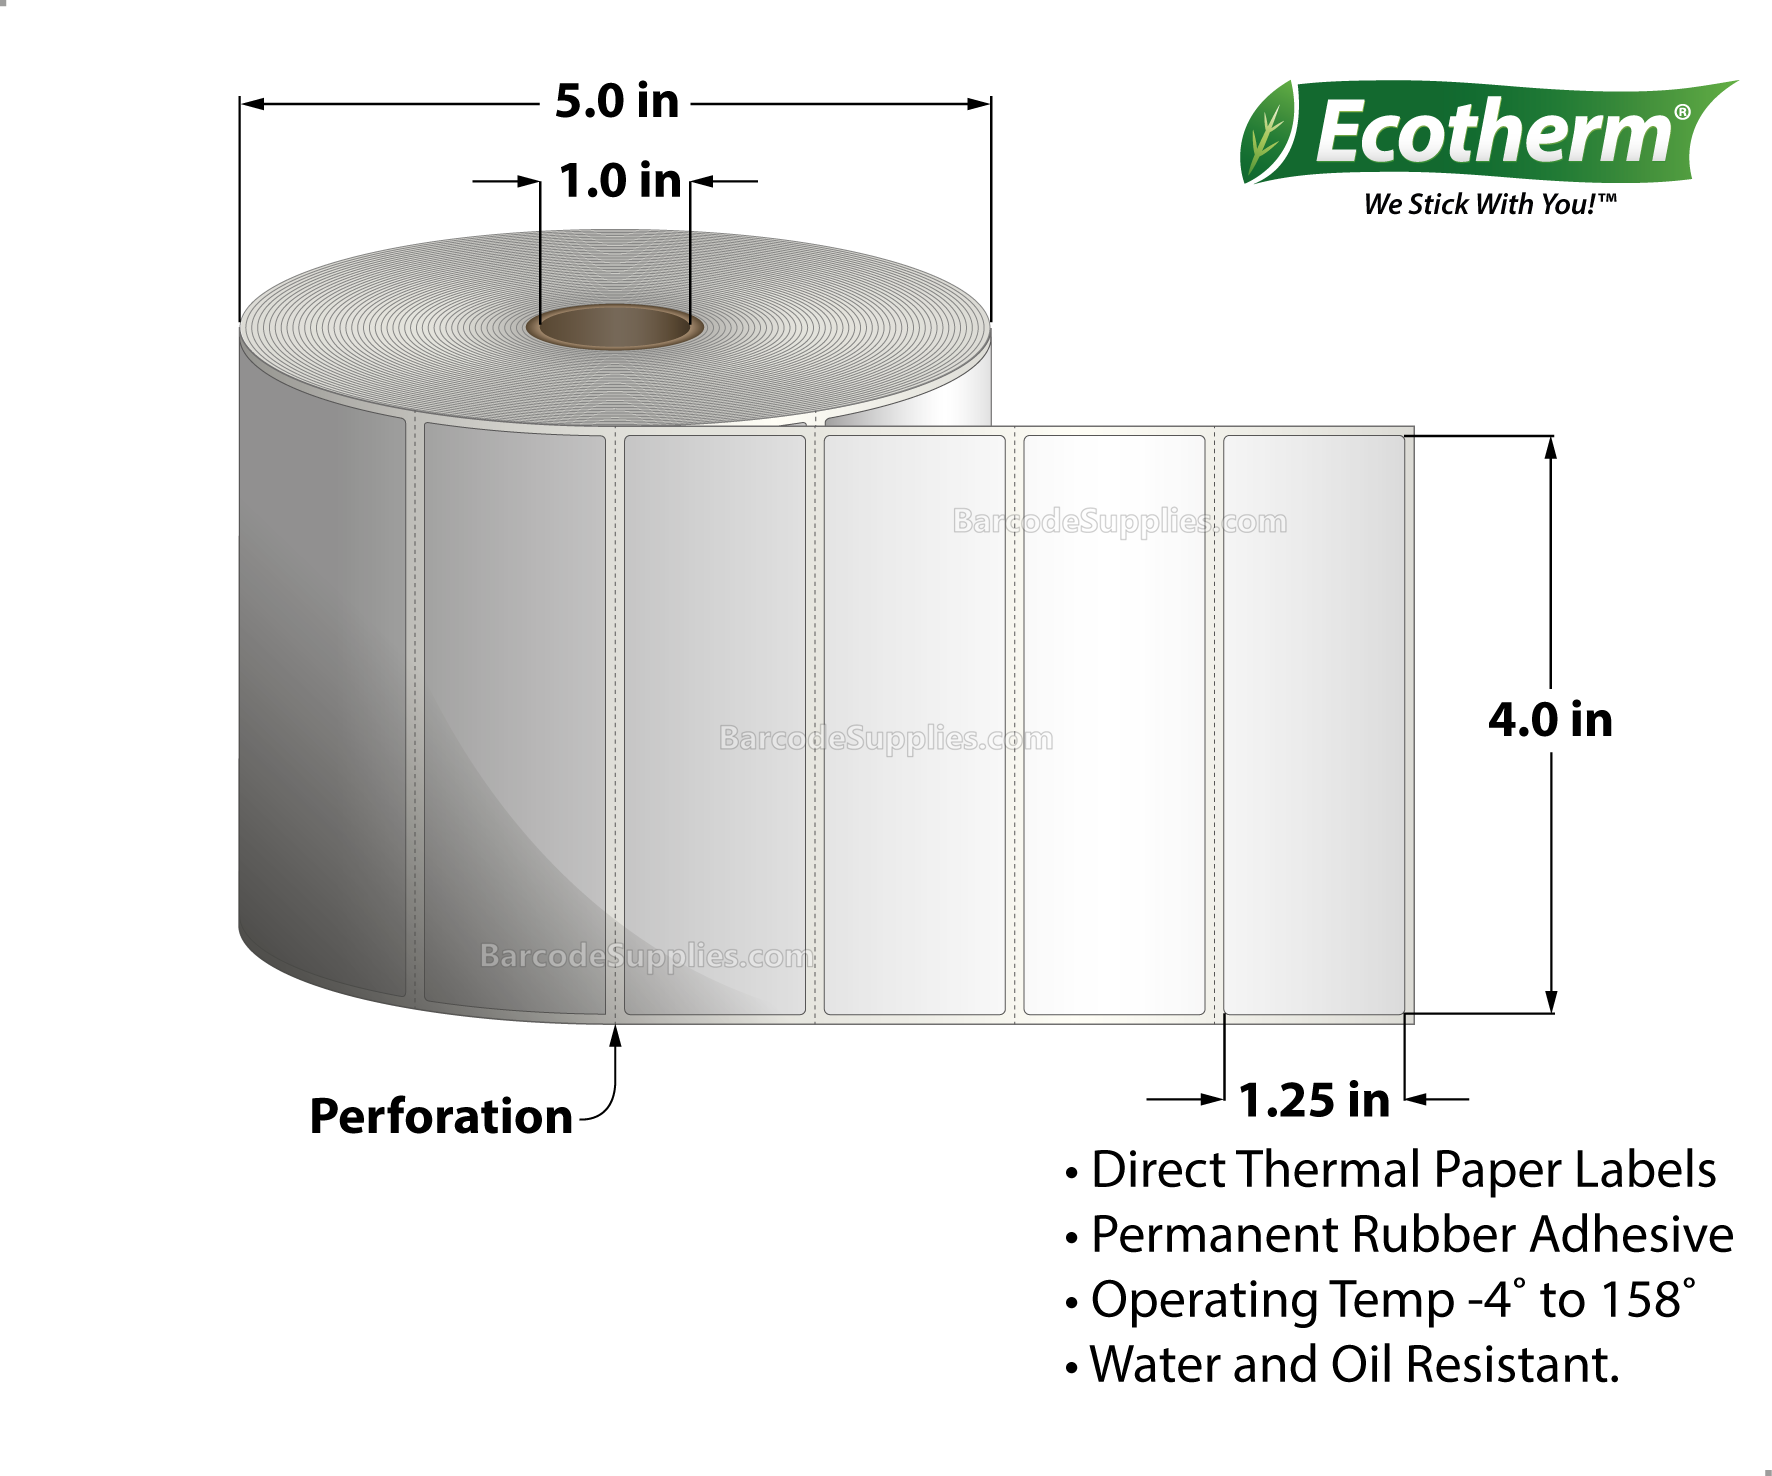 4 x 1.25 Direct Thermal White Labels With Rubber Adhesive - Perforated - 2100 Labels Per Roll - Carton Of 6 Rolls - 12600 Labels Total - MPN: ECOTHERM15147-6